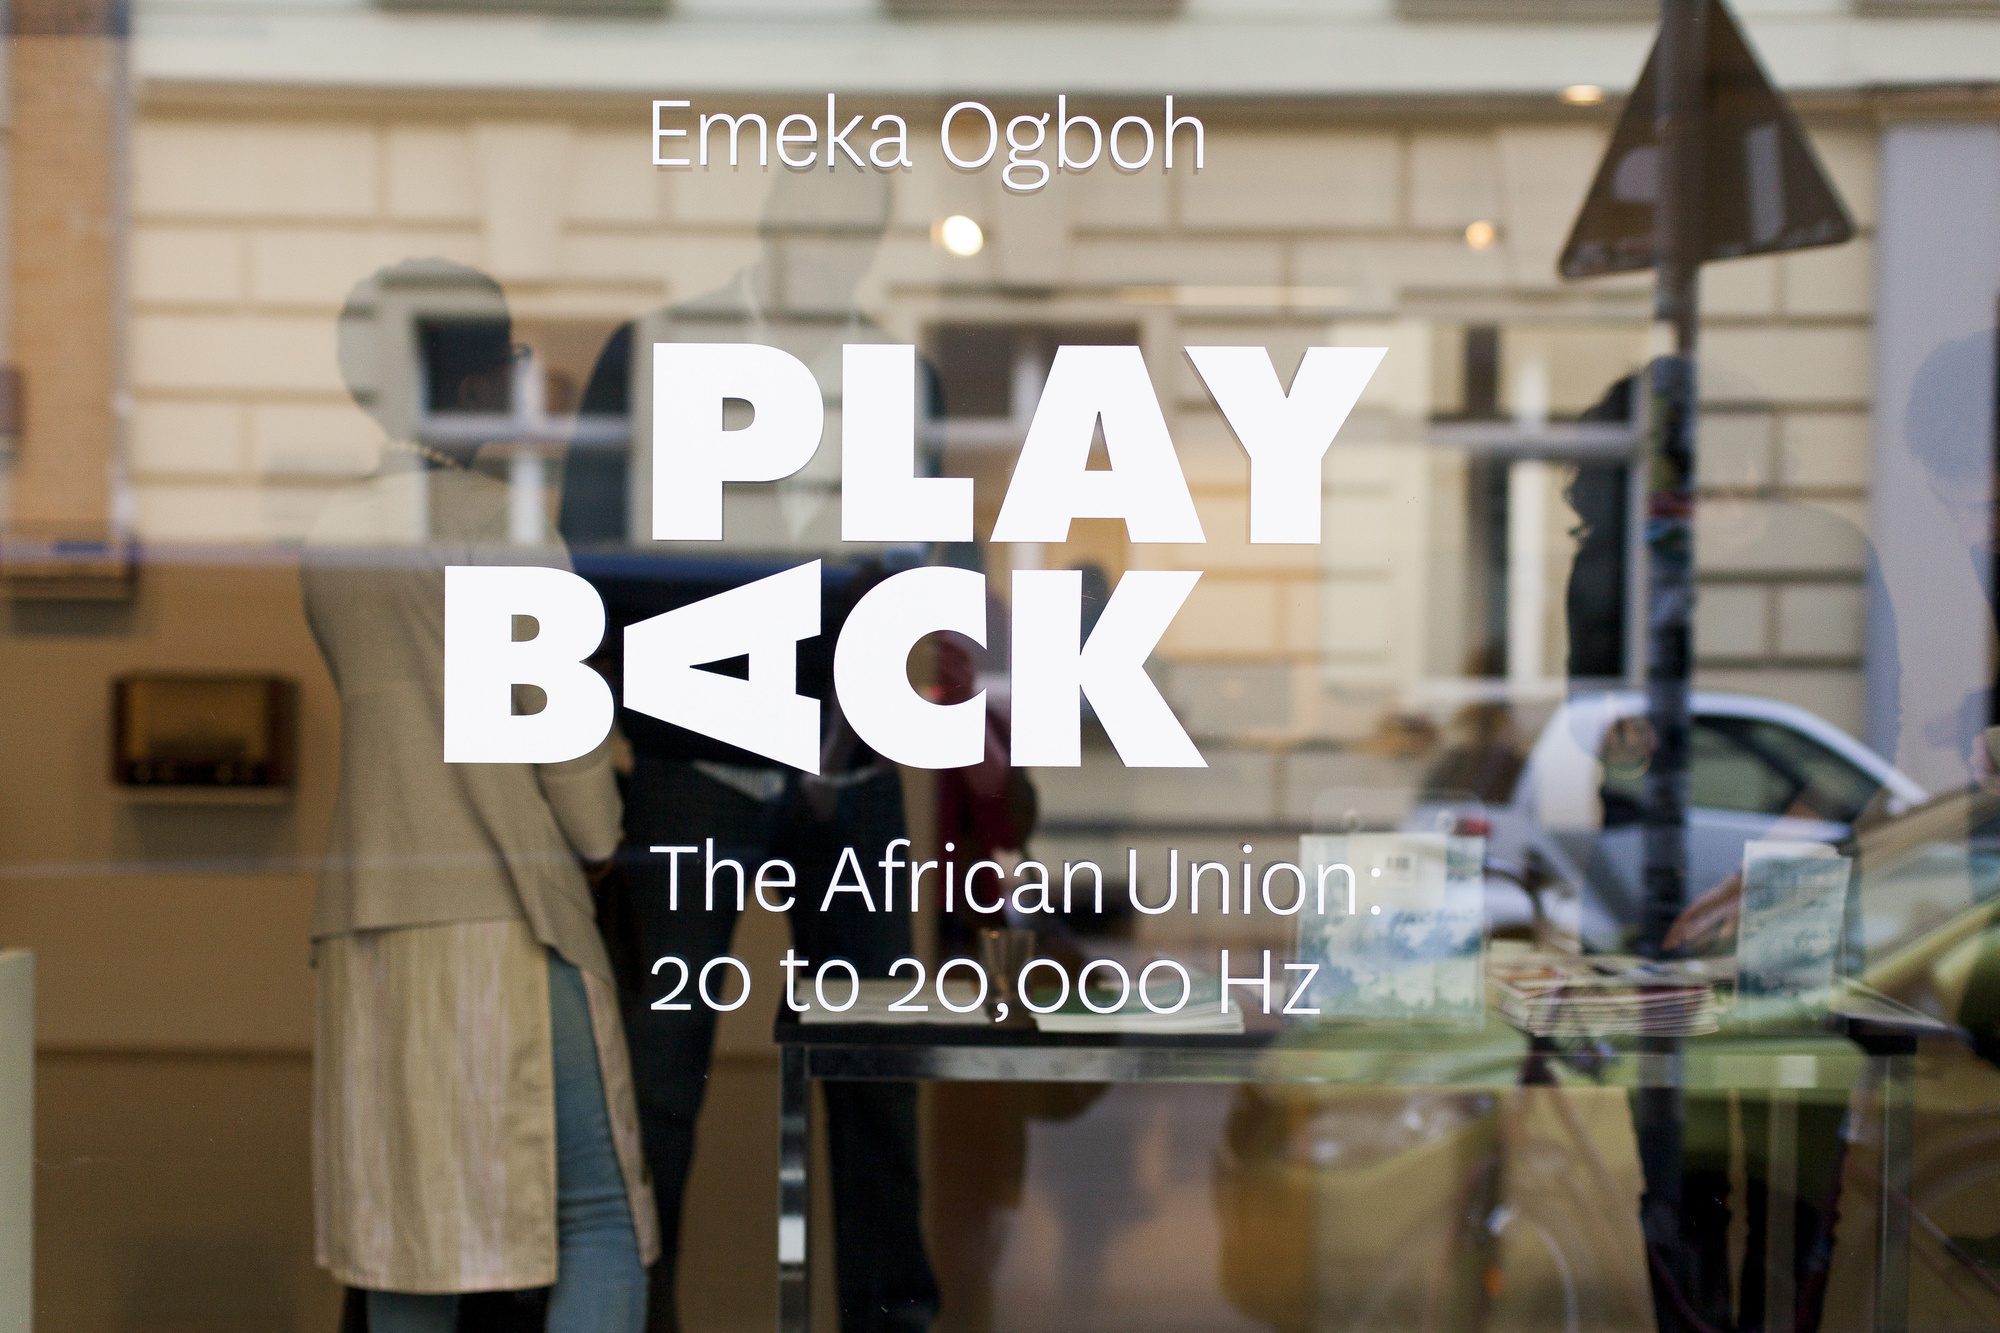 Emeka Ogboh, PLAY BACK – The African Union: 20 to 20,000 Hz, installation view, 2015, ifa Gallery Berlin. Courtesy of the artist